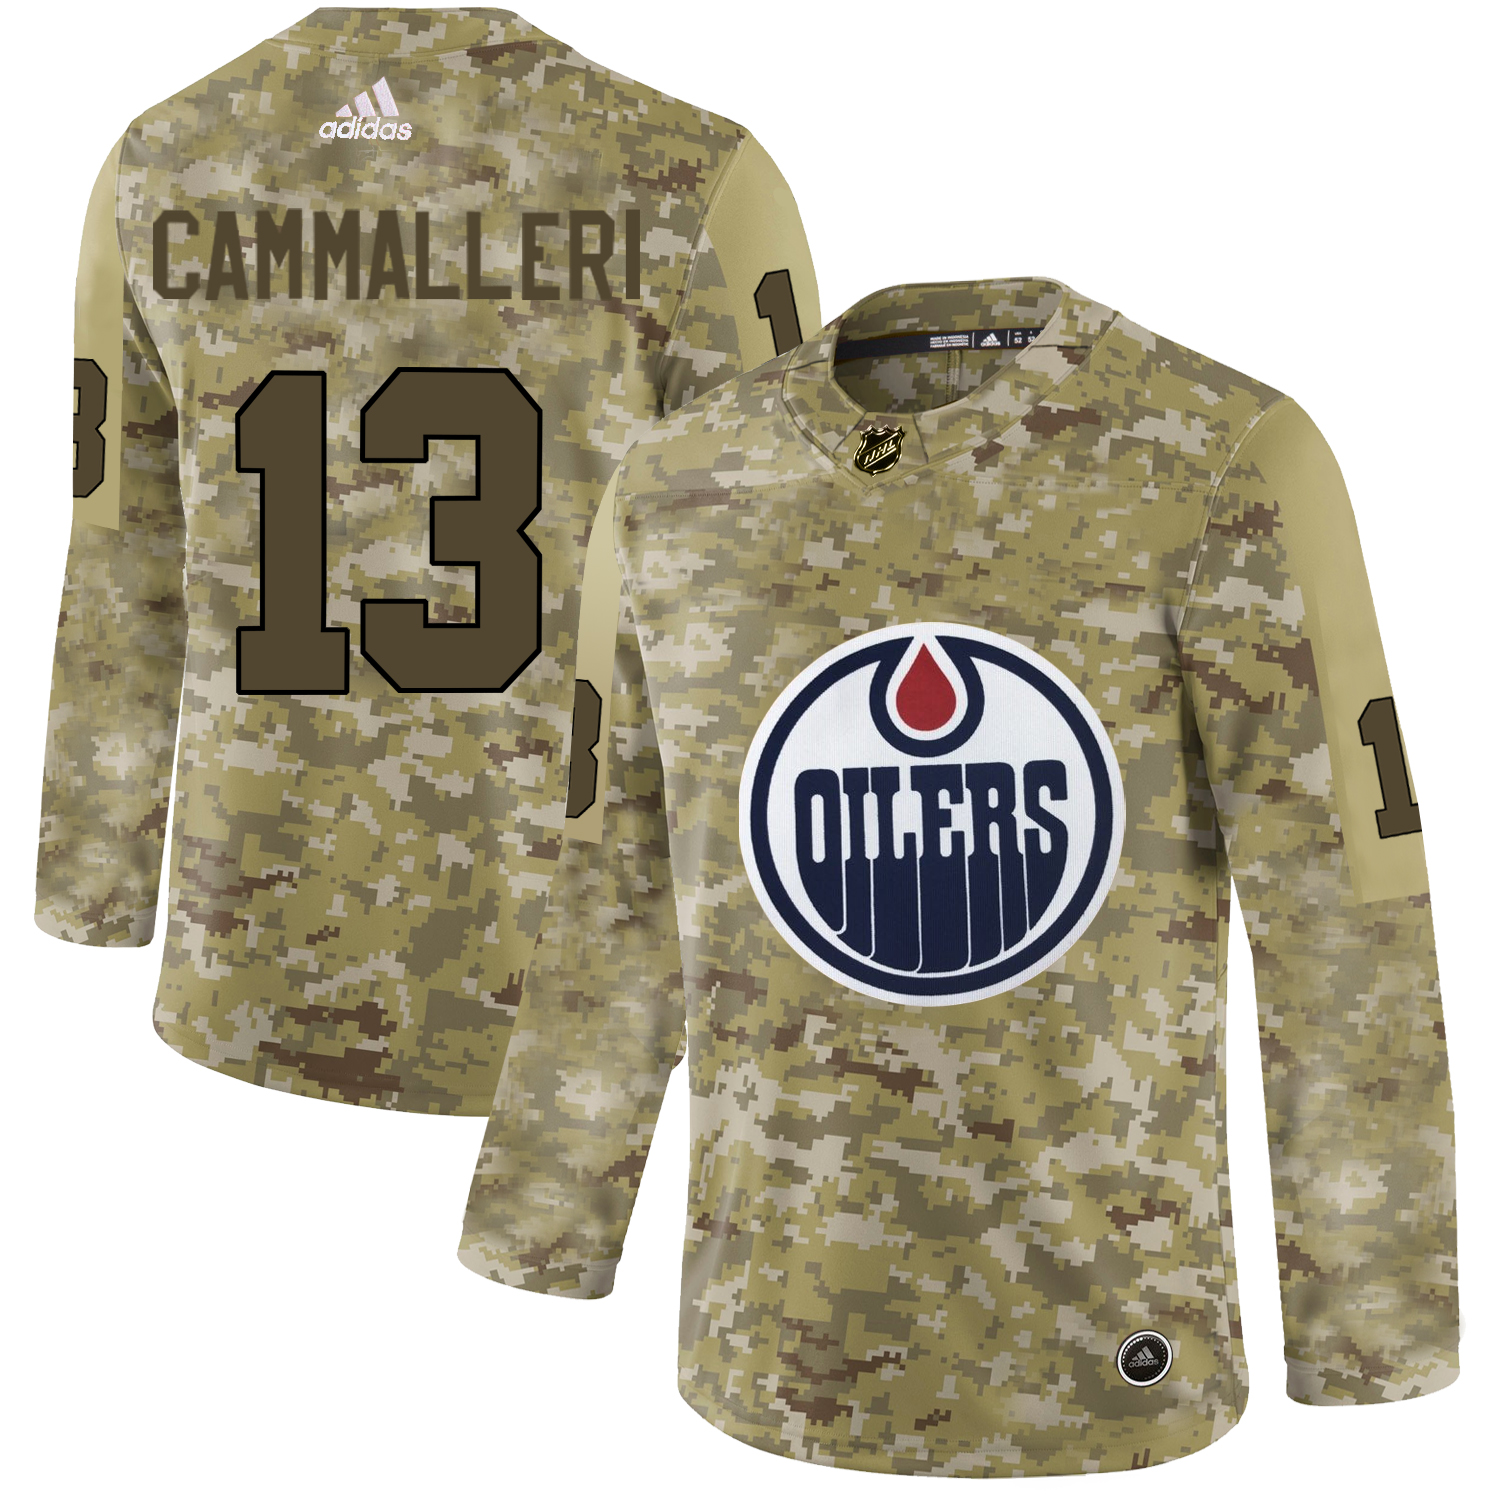 Adidas Oilers #13 Michael Cammalleri Camo Authentic Stitched NHL Jersey